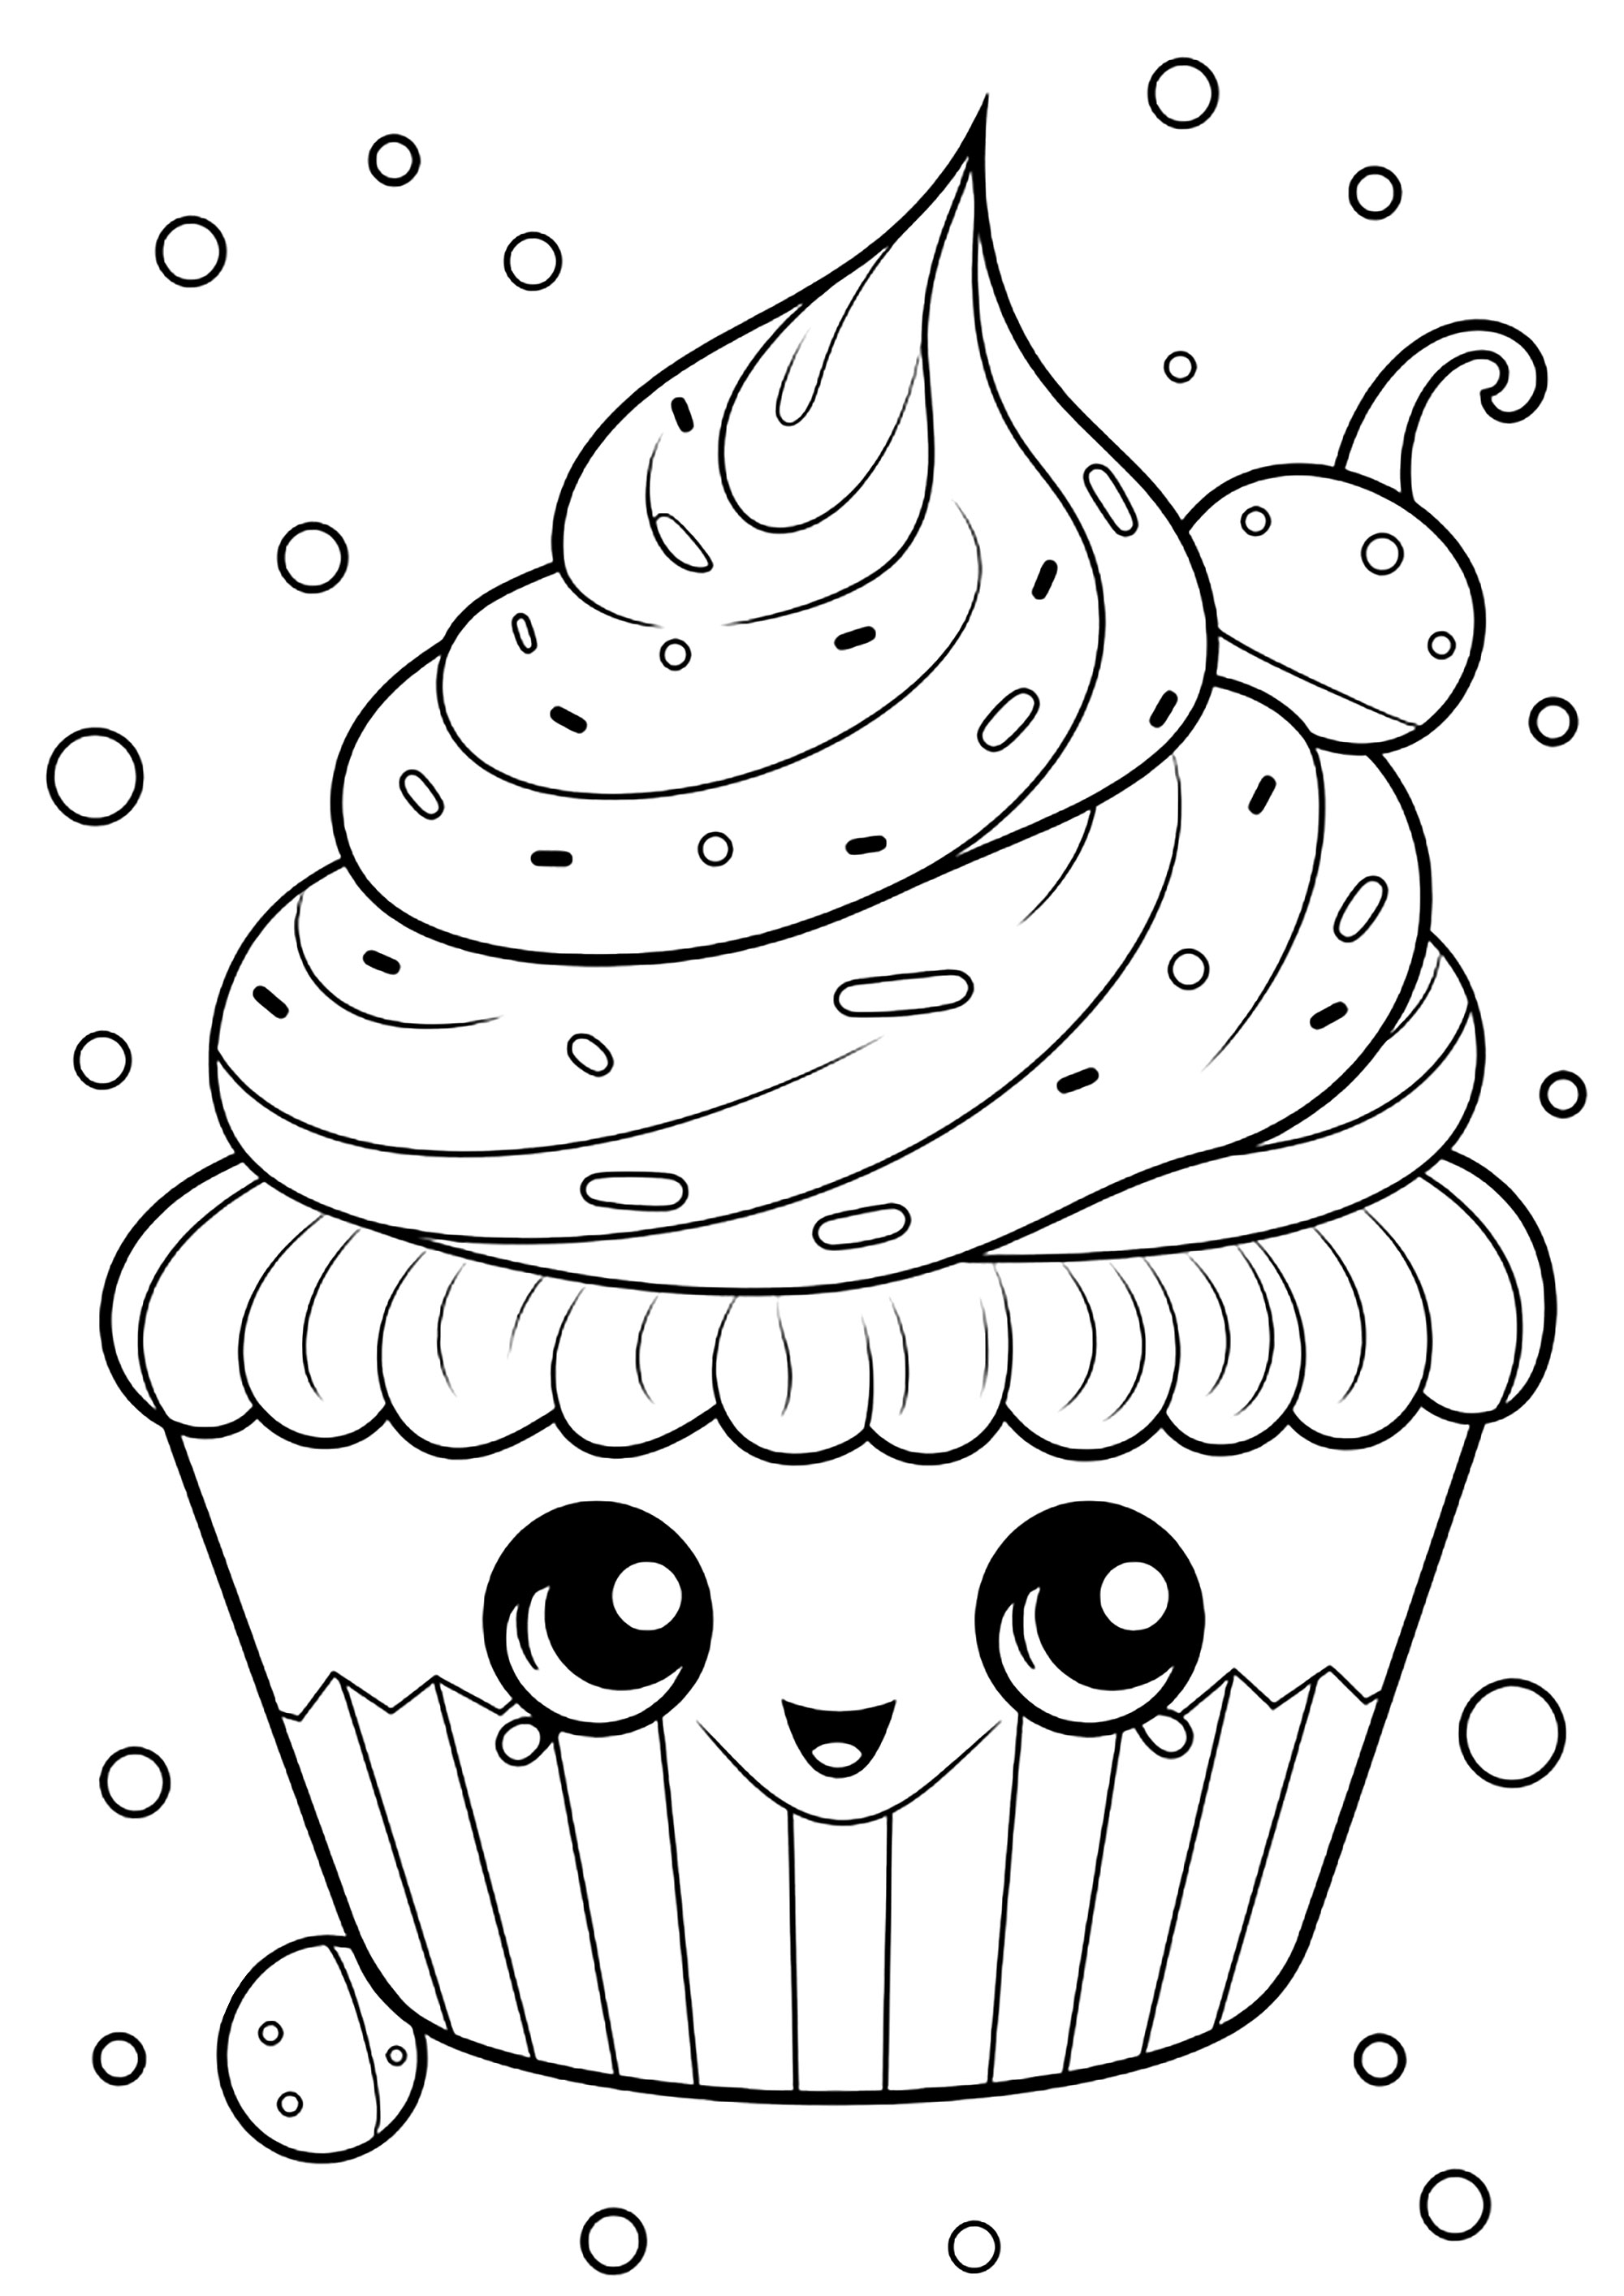 Simple free Cupcakes And Cakes coloring page to print and color